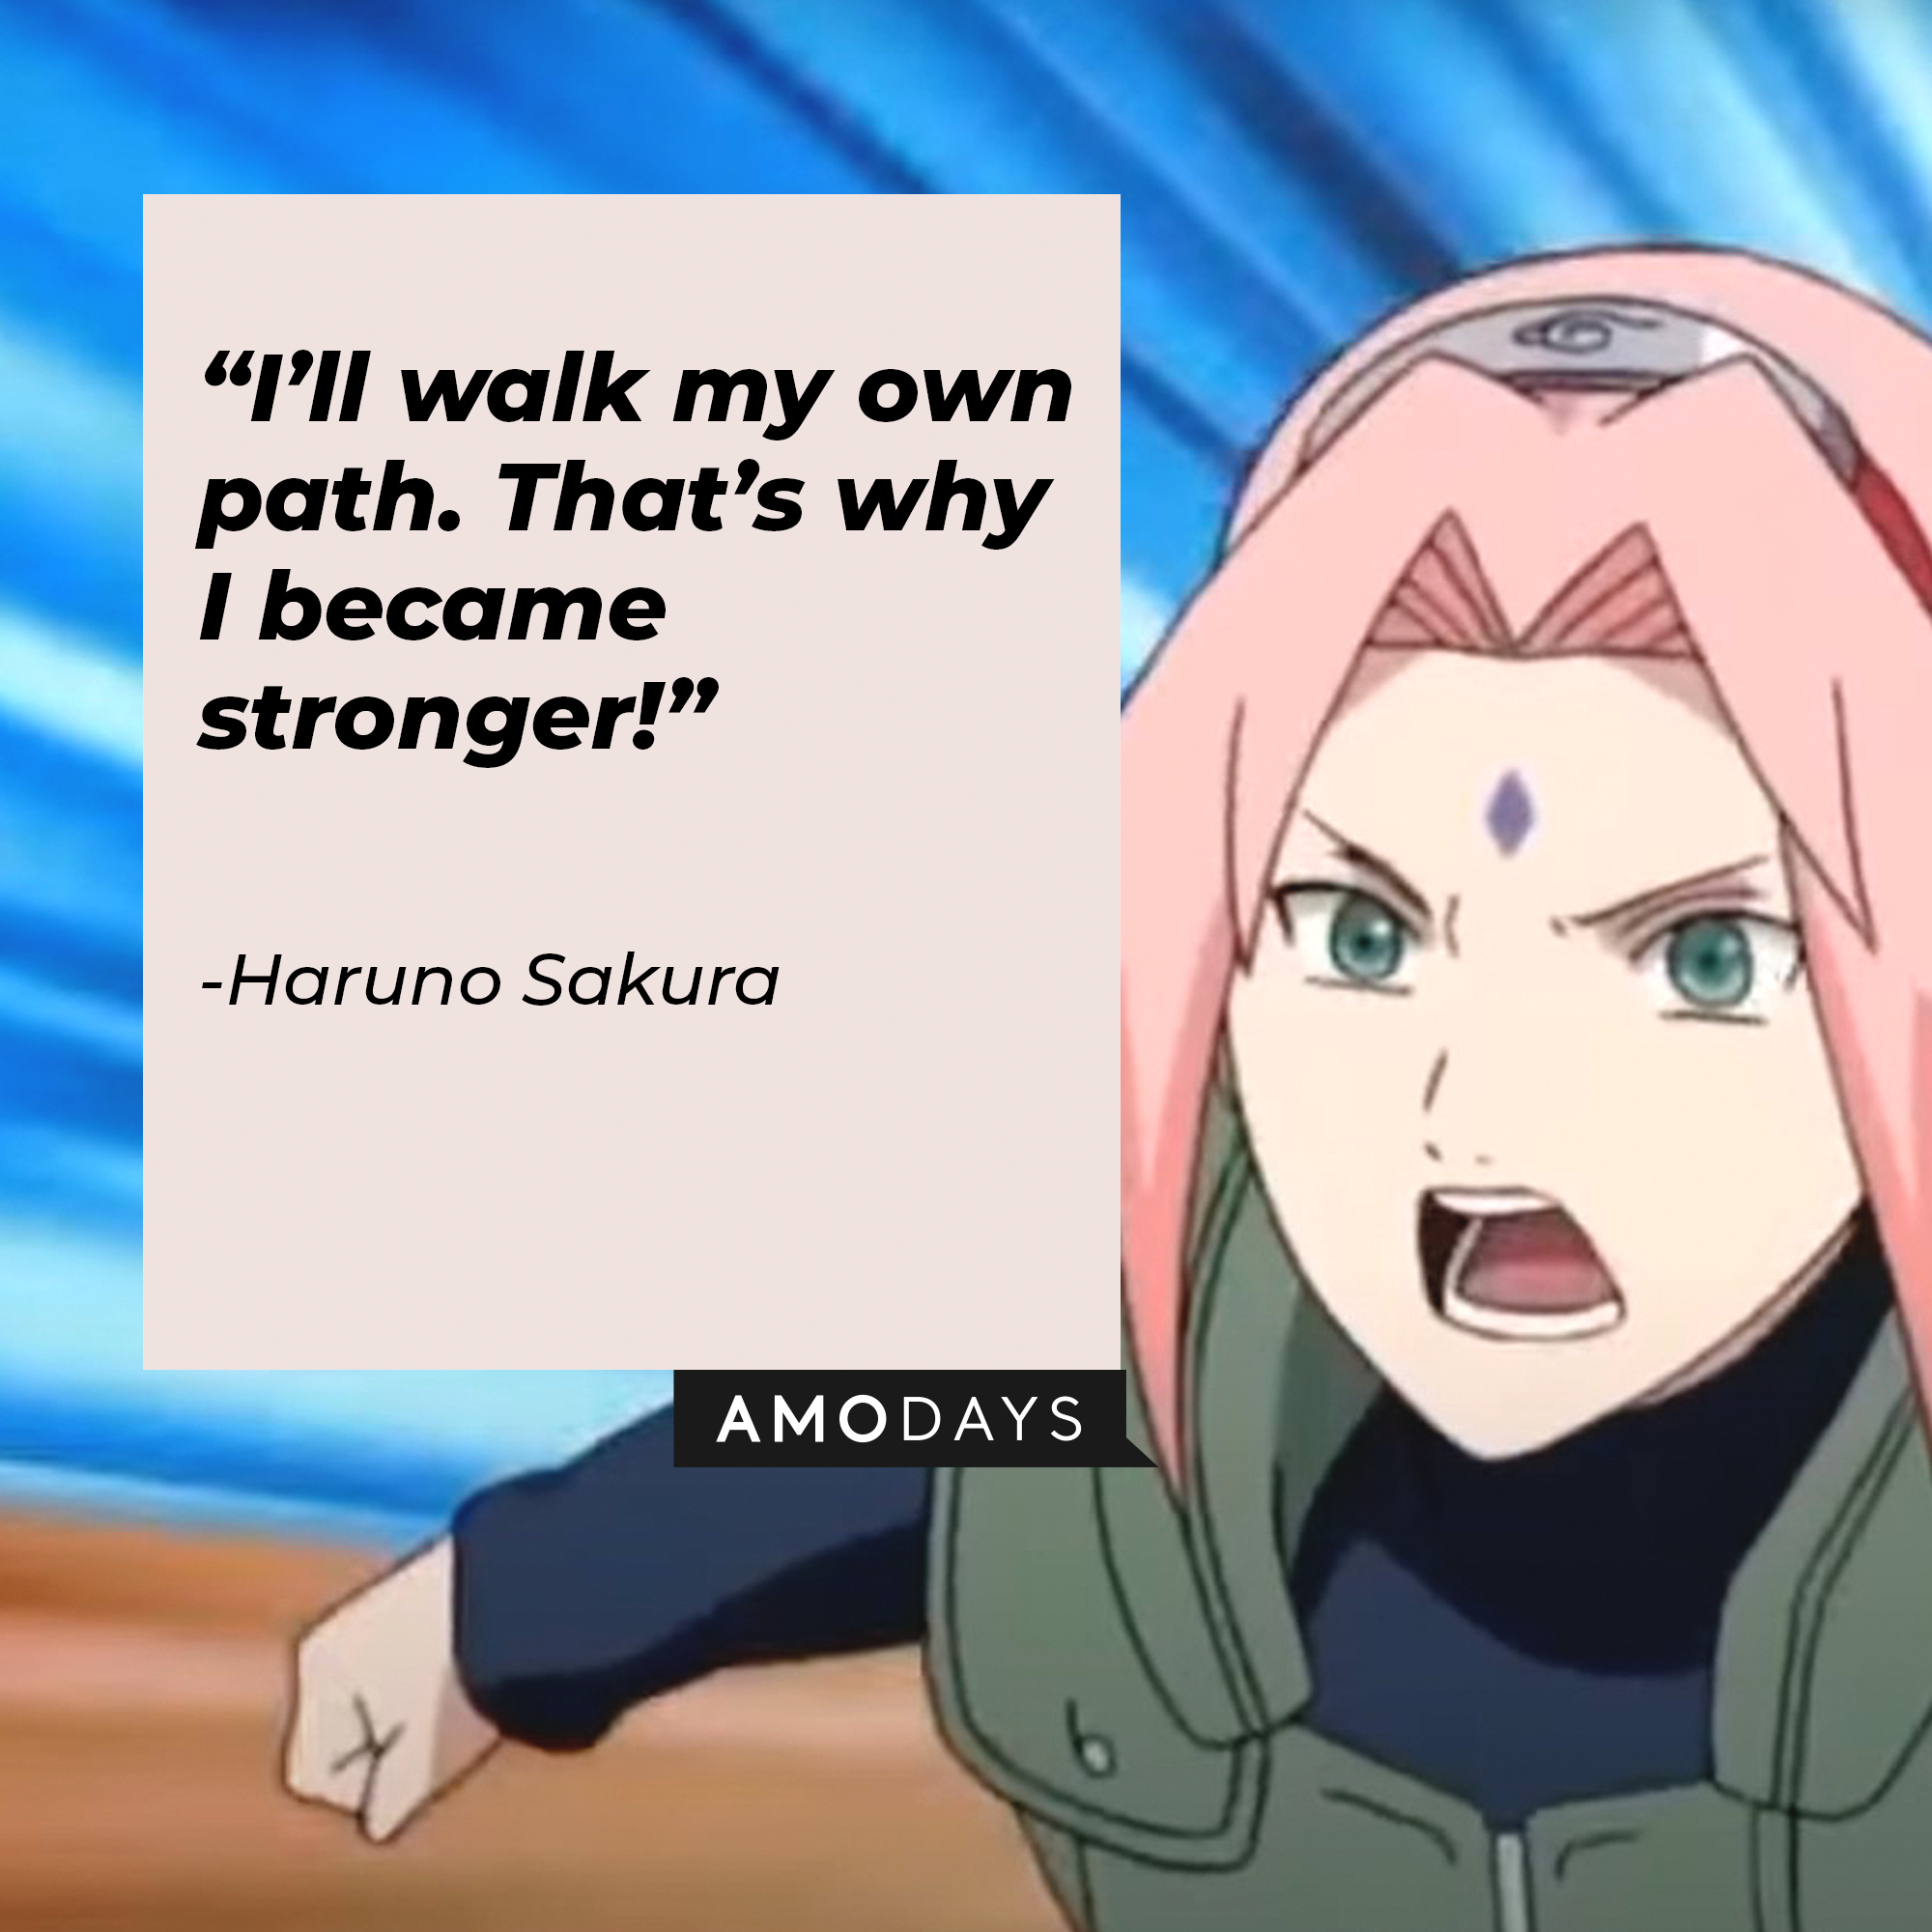 Haruno Sakura’s quote: “I’ll walk my own path. That’s why I became stronger!” | Source: facebook.com/narutoofficialsns